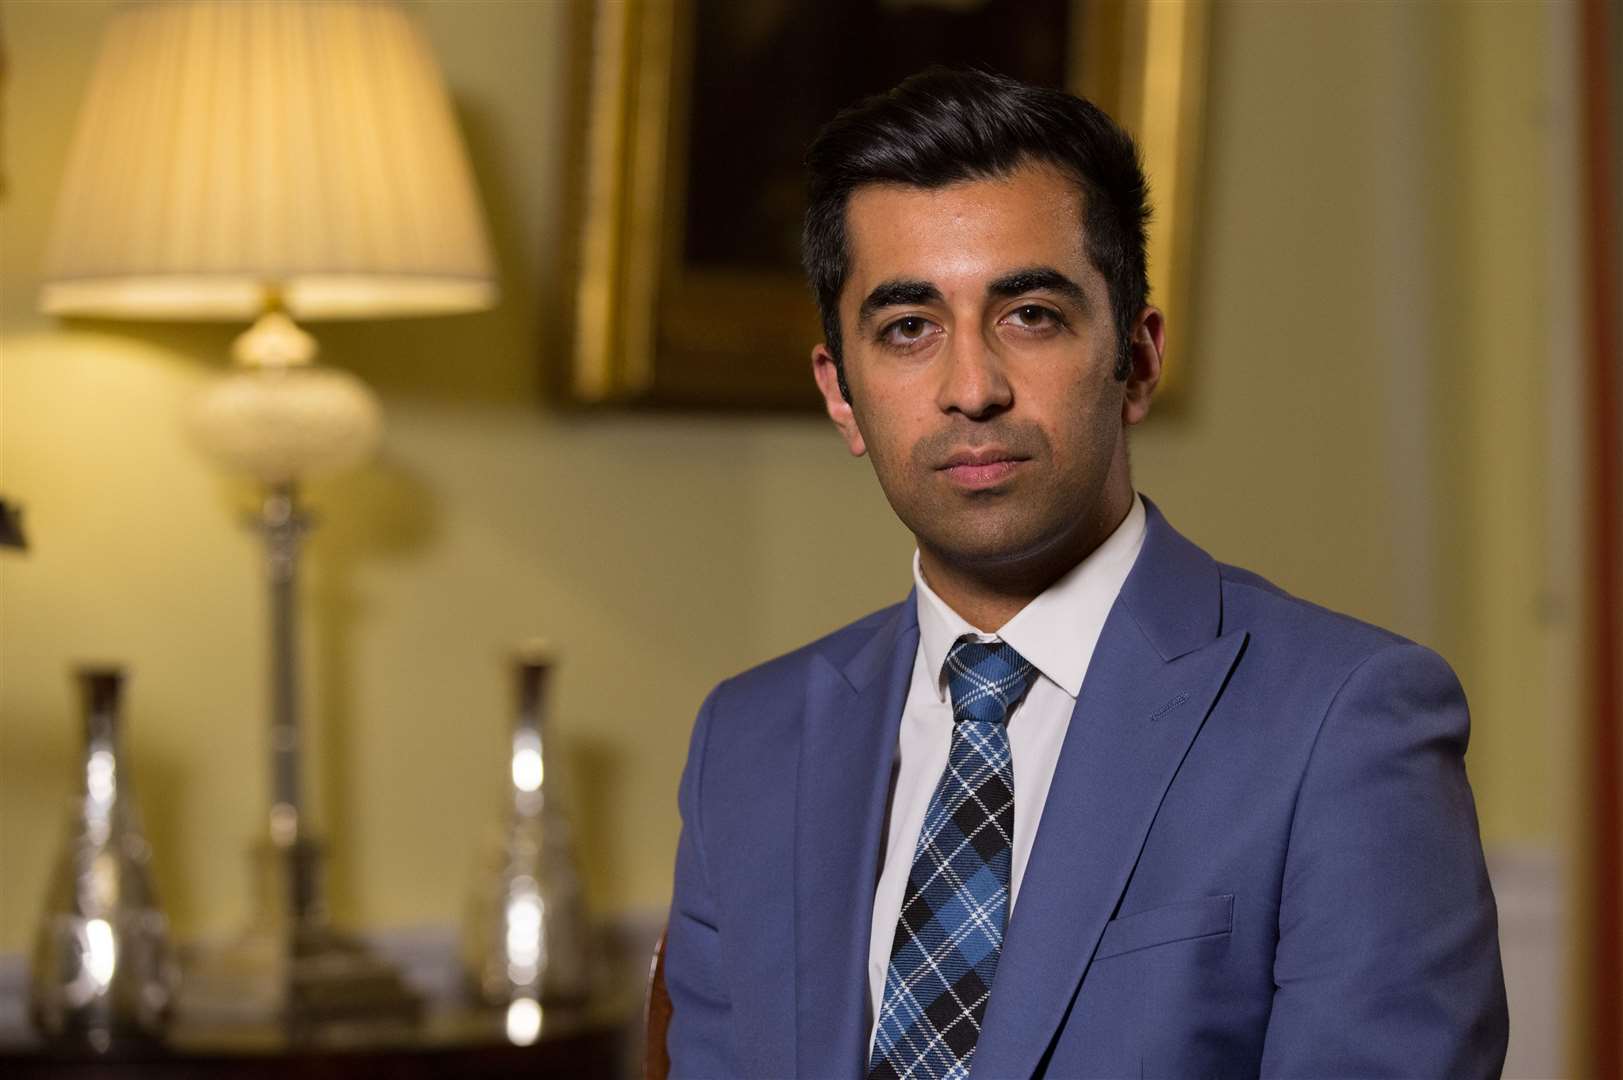 Health secretary Humza Yousaf says the vaccination programme is 'running well'.